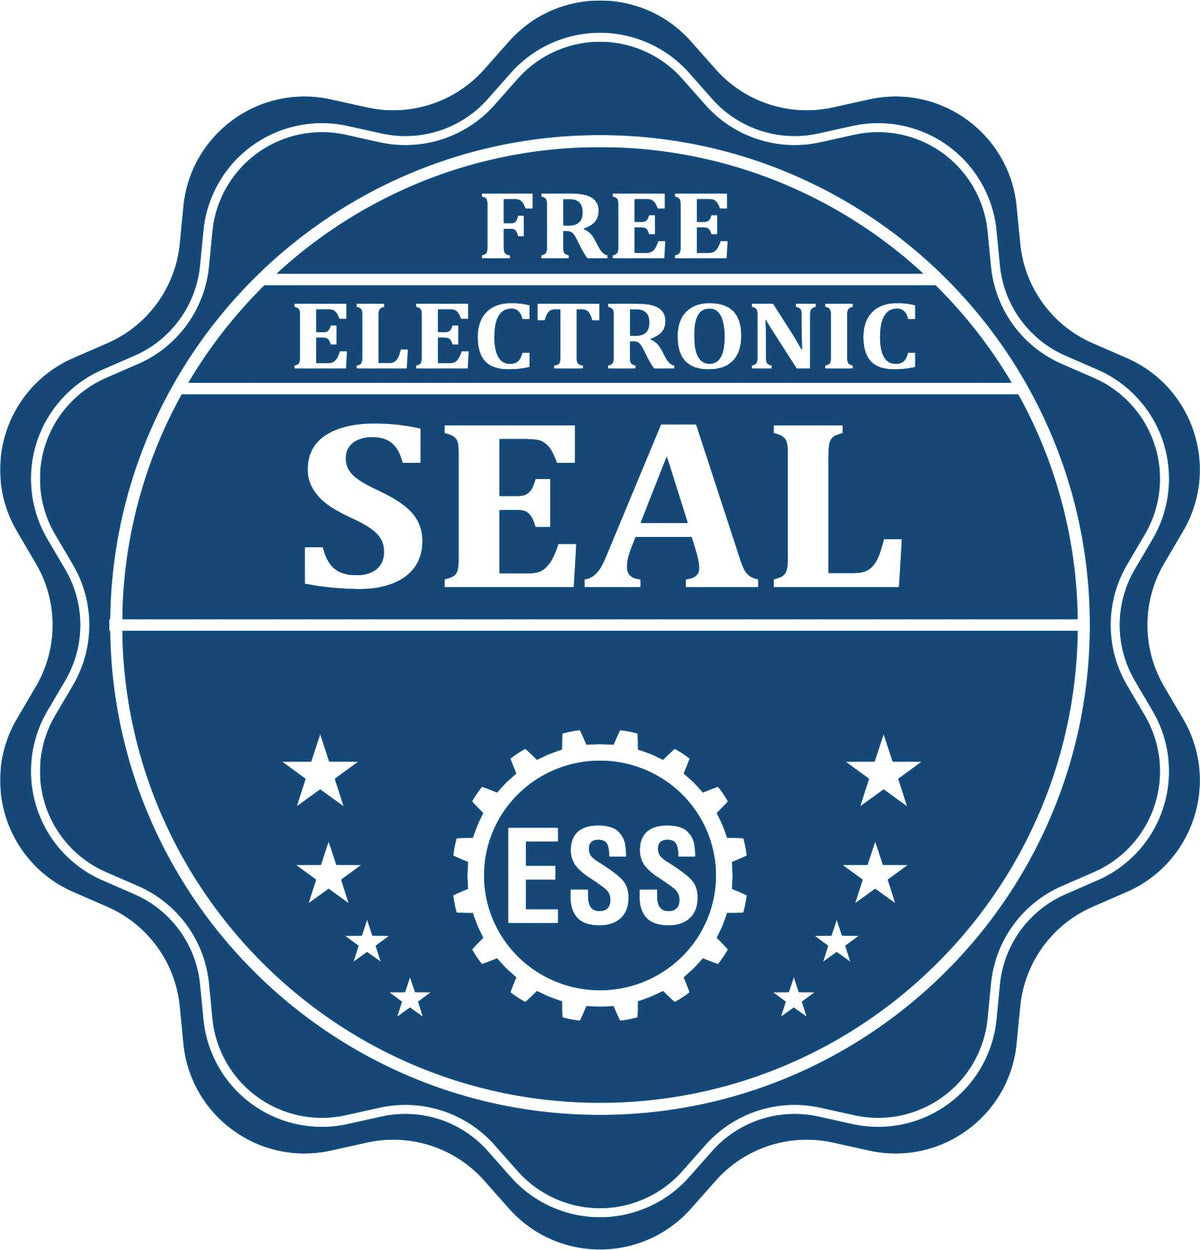 A badge showing a free electronic seal for the Heavy Duty Cast Iron Louisiana Land Surveyor Seal Embosser with stars and the ESS gear on the emblem.